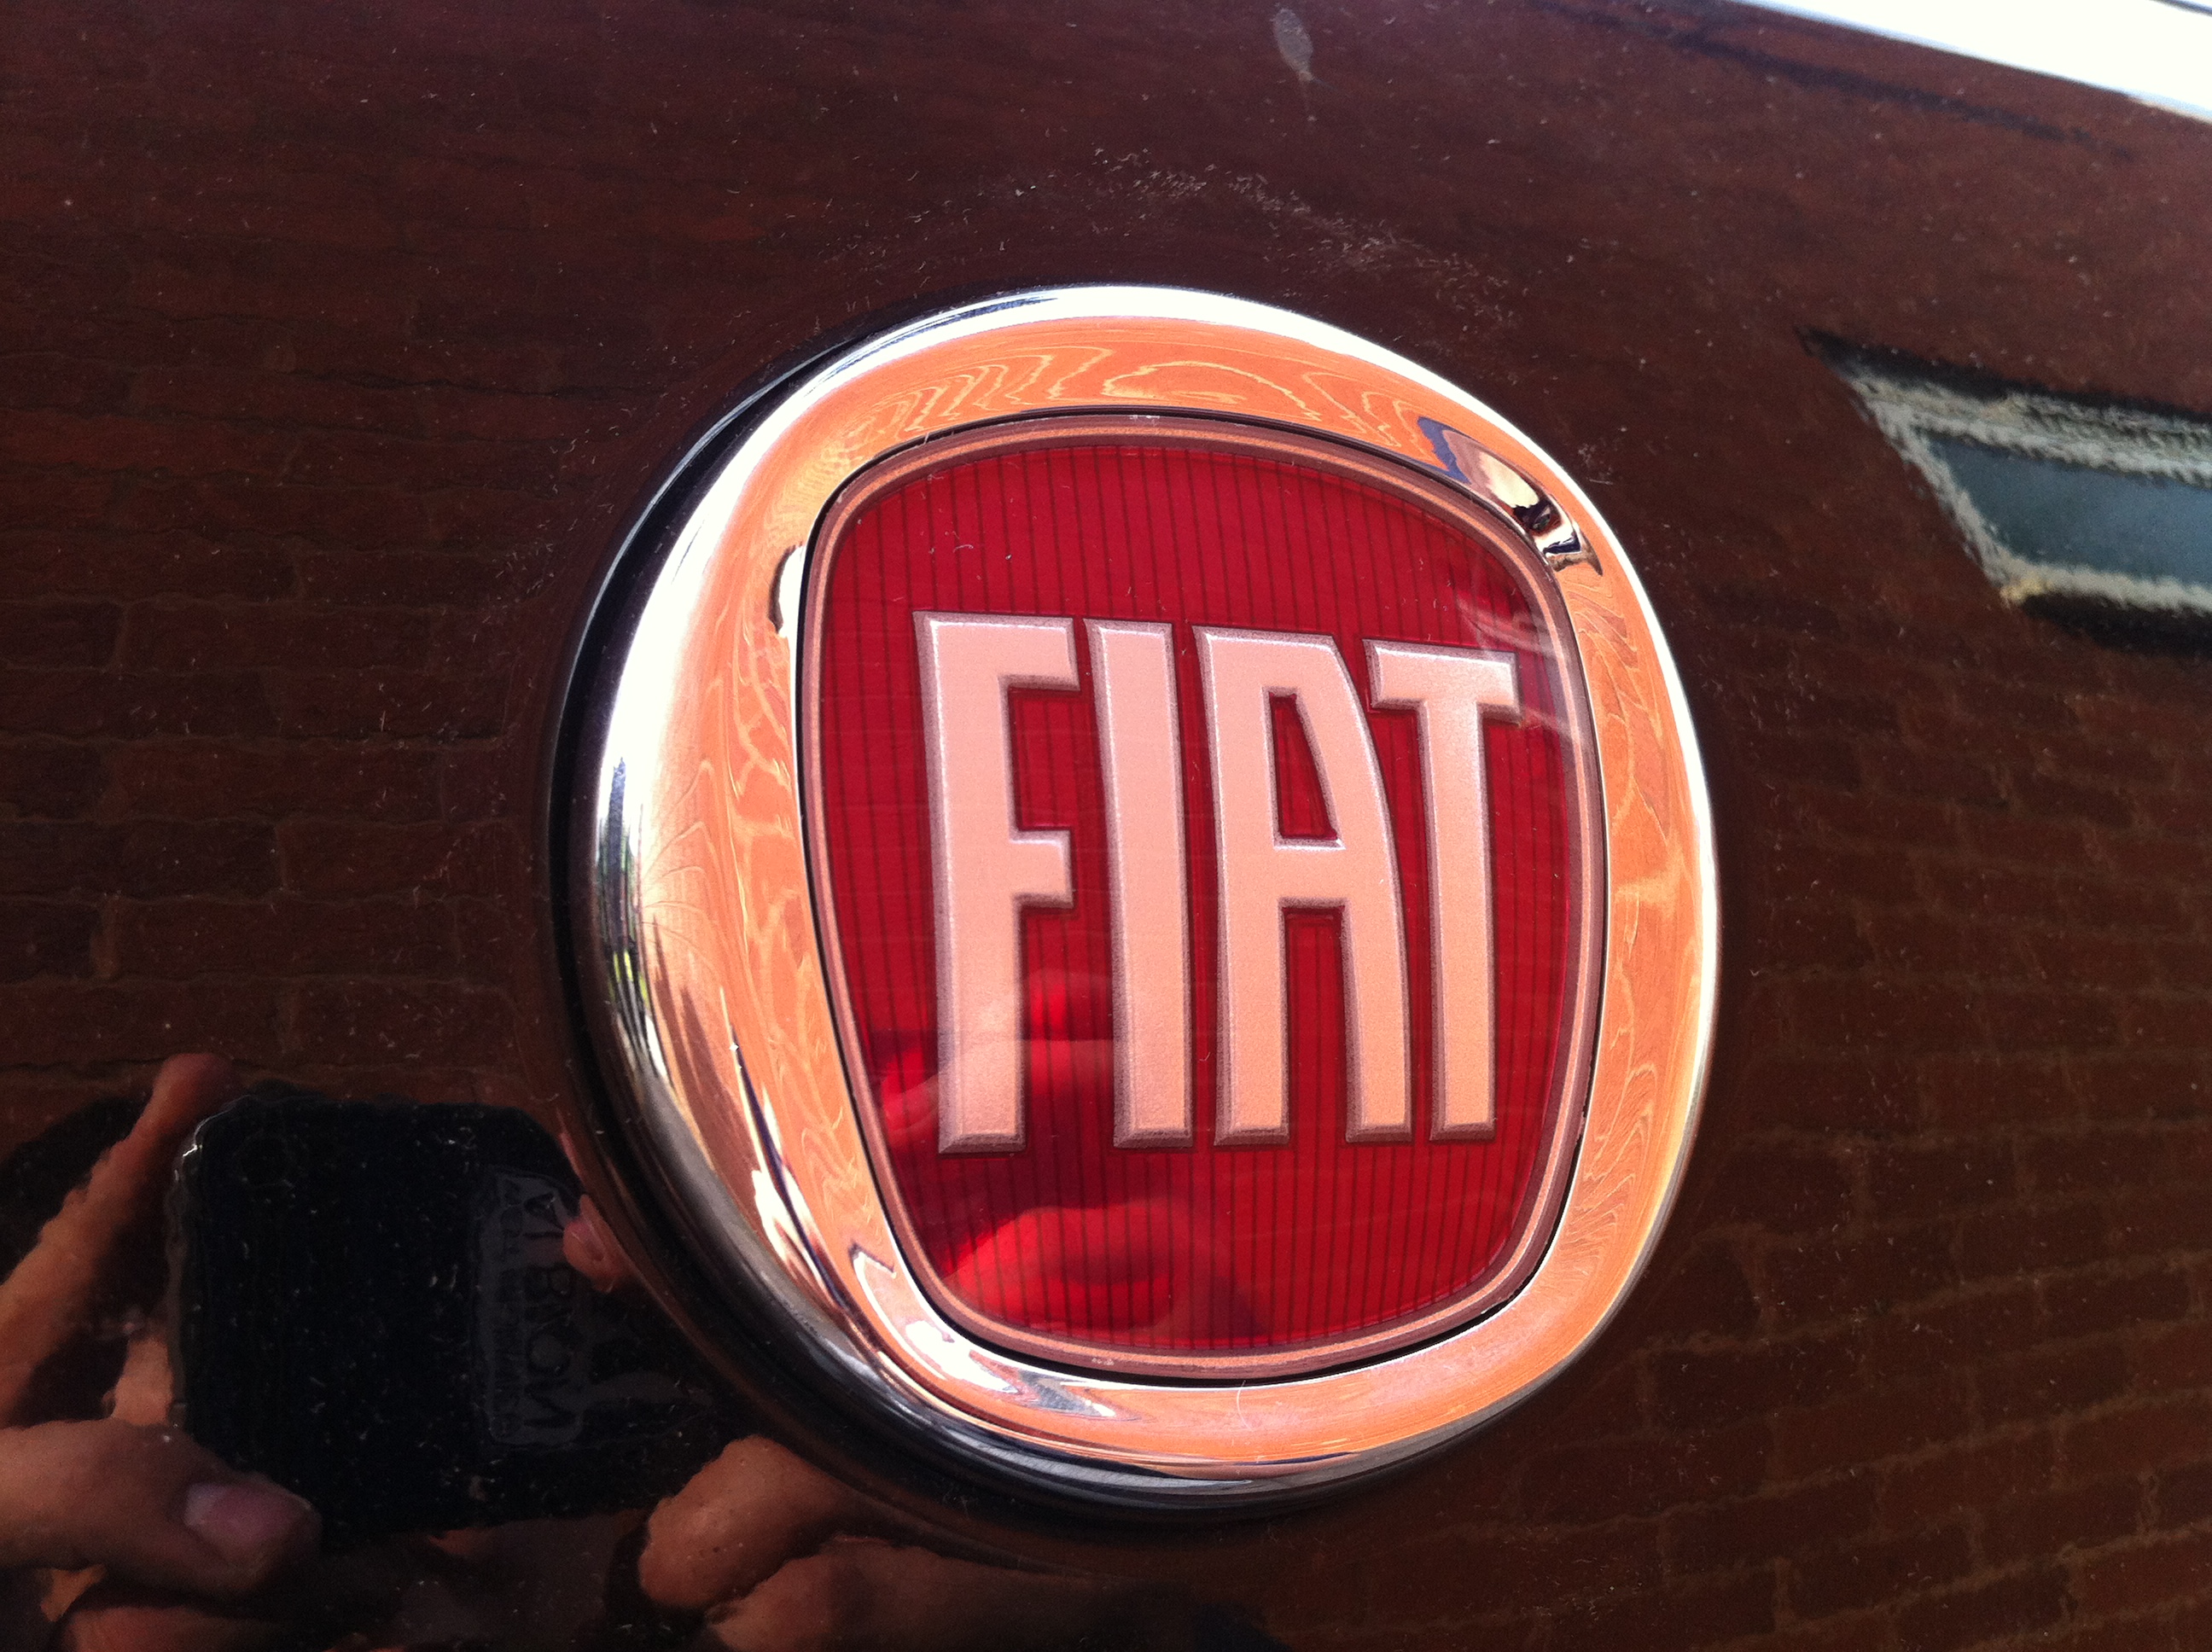 replaced fiat badge